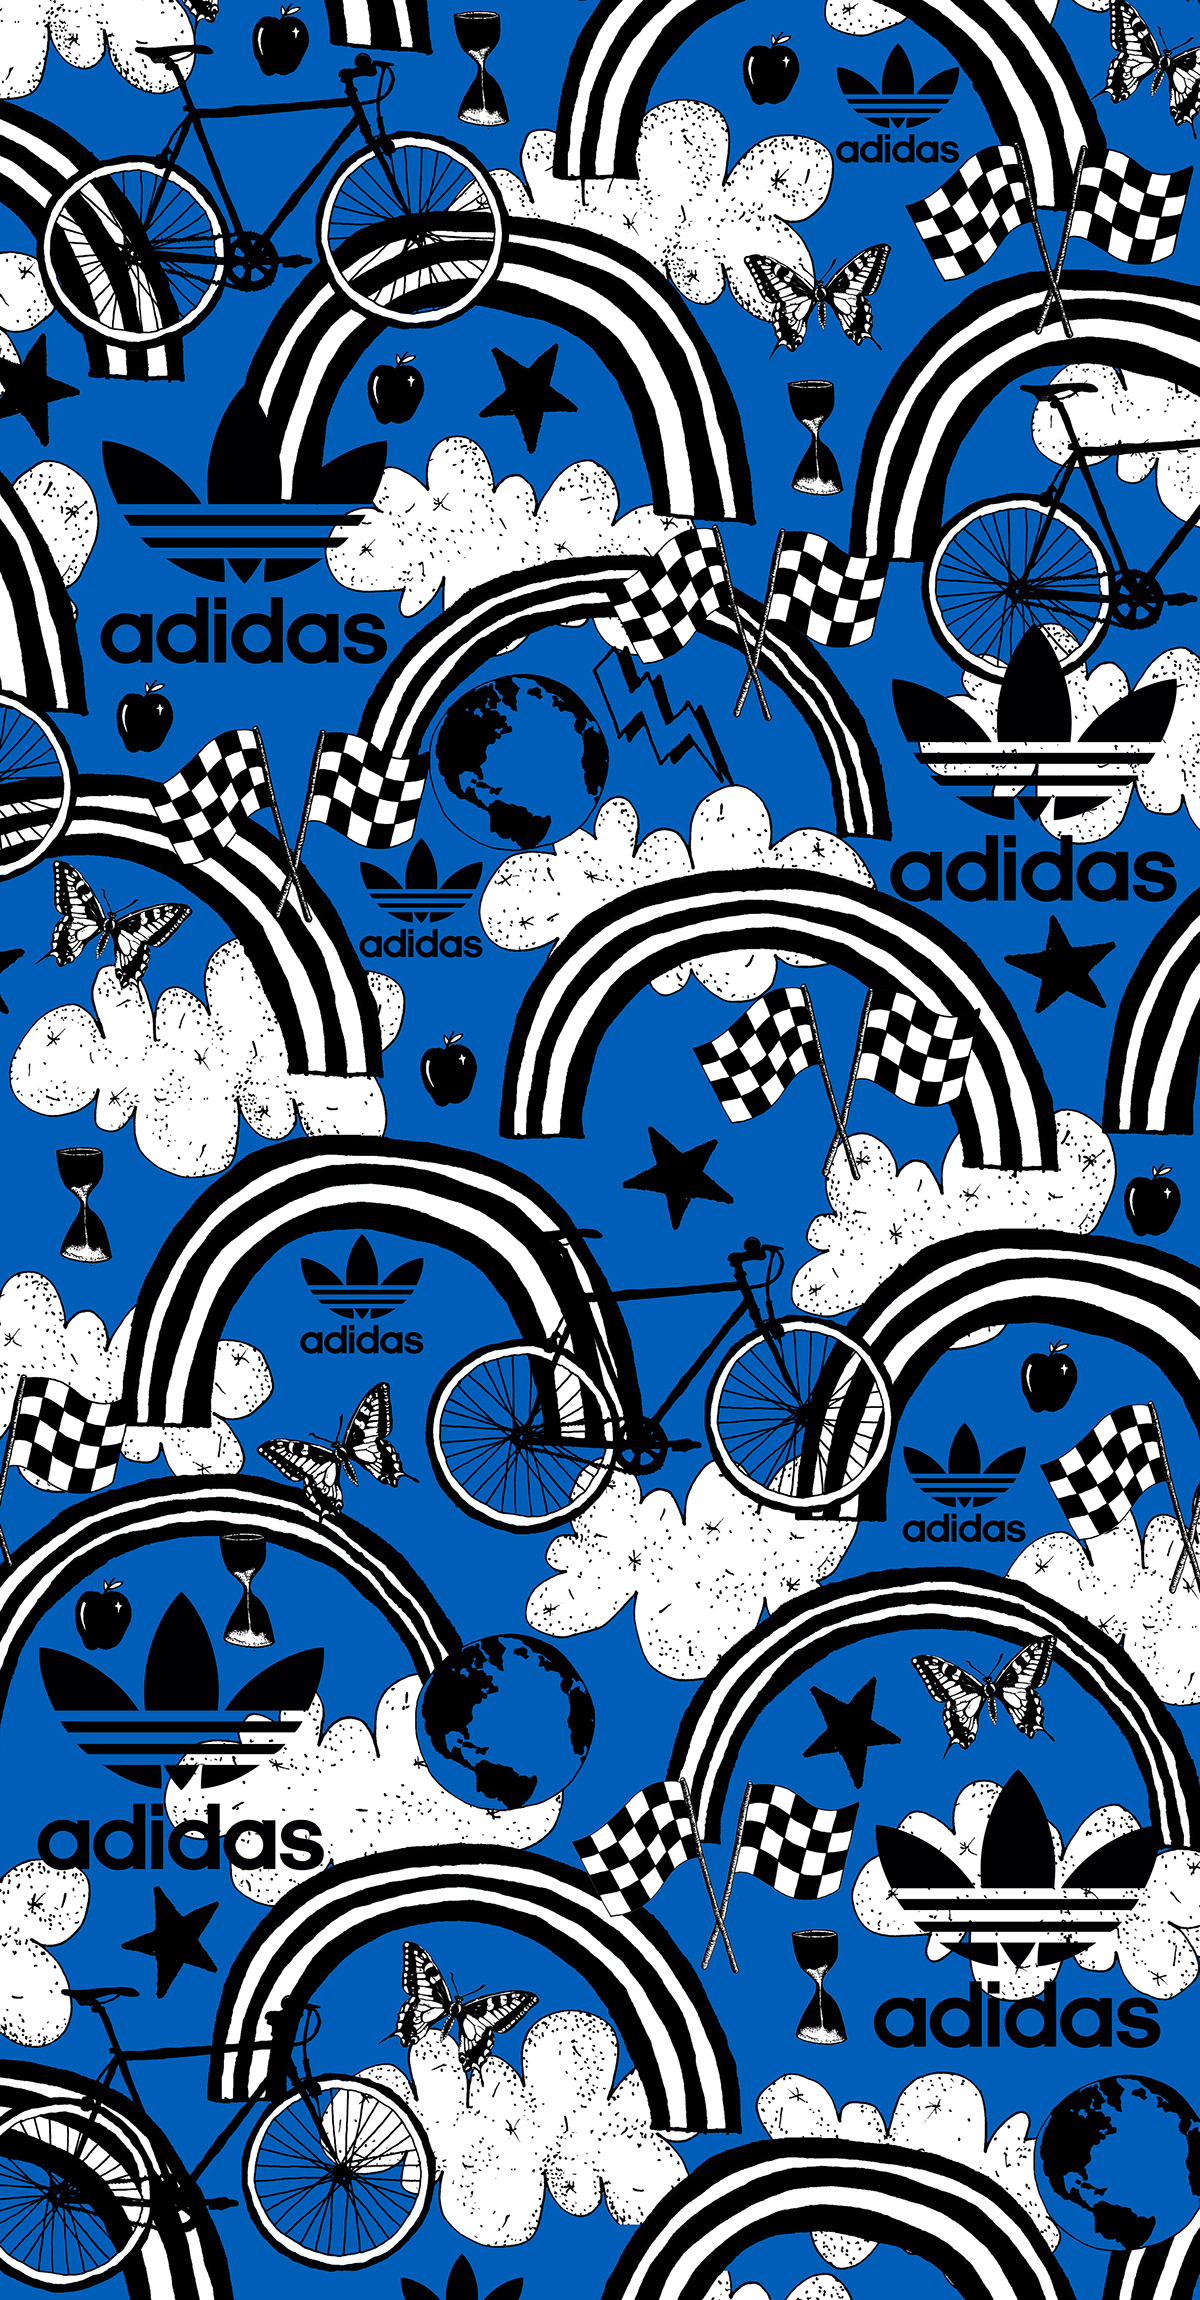 Illustrated wheatpaste poster designed by Leanna Perry for Adidas Originals.